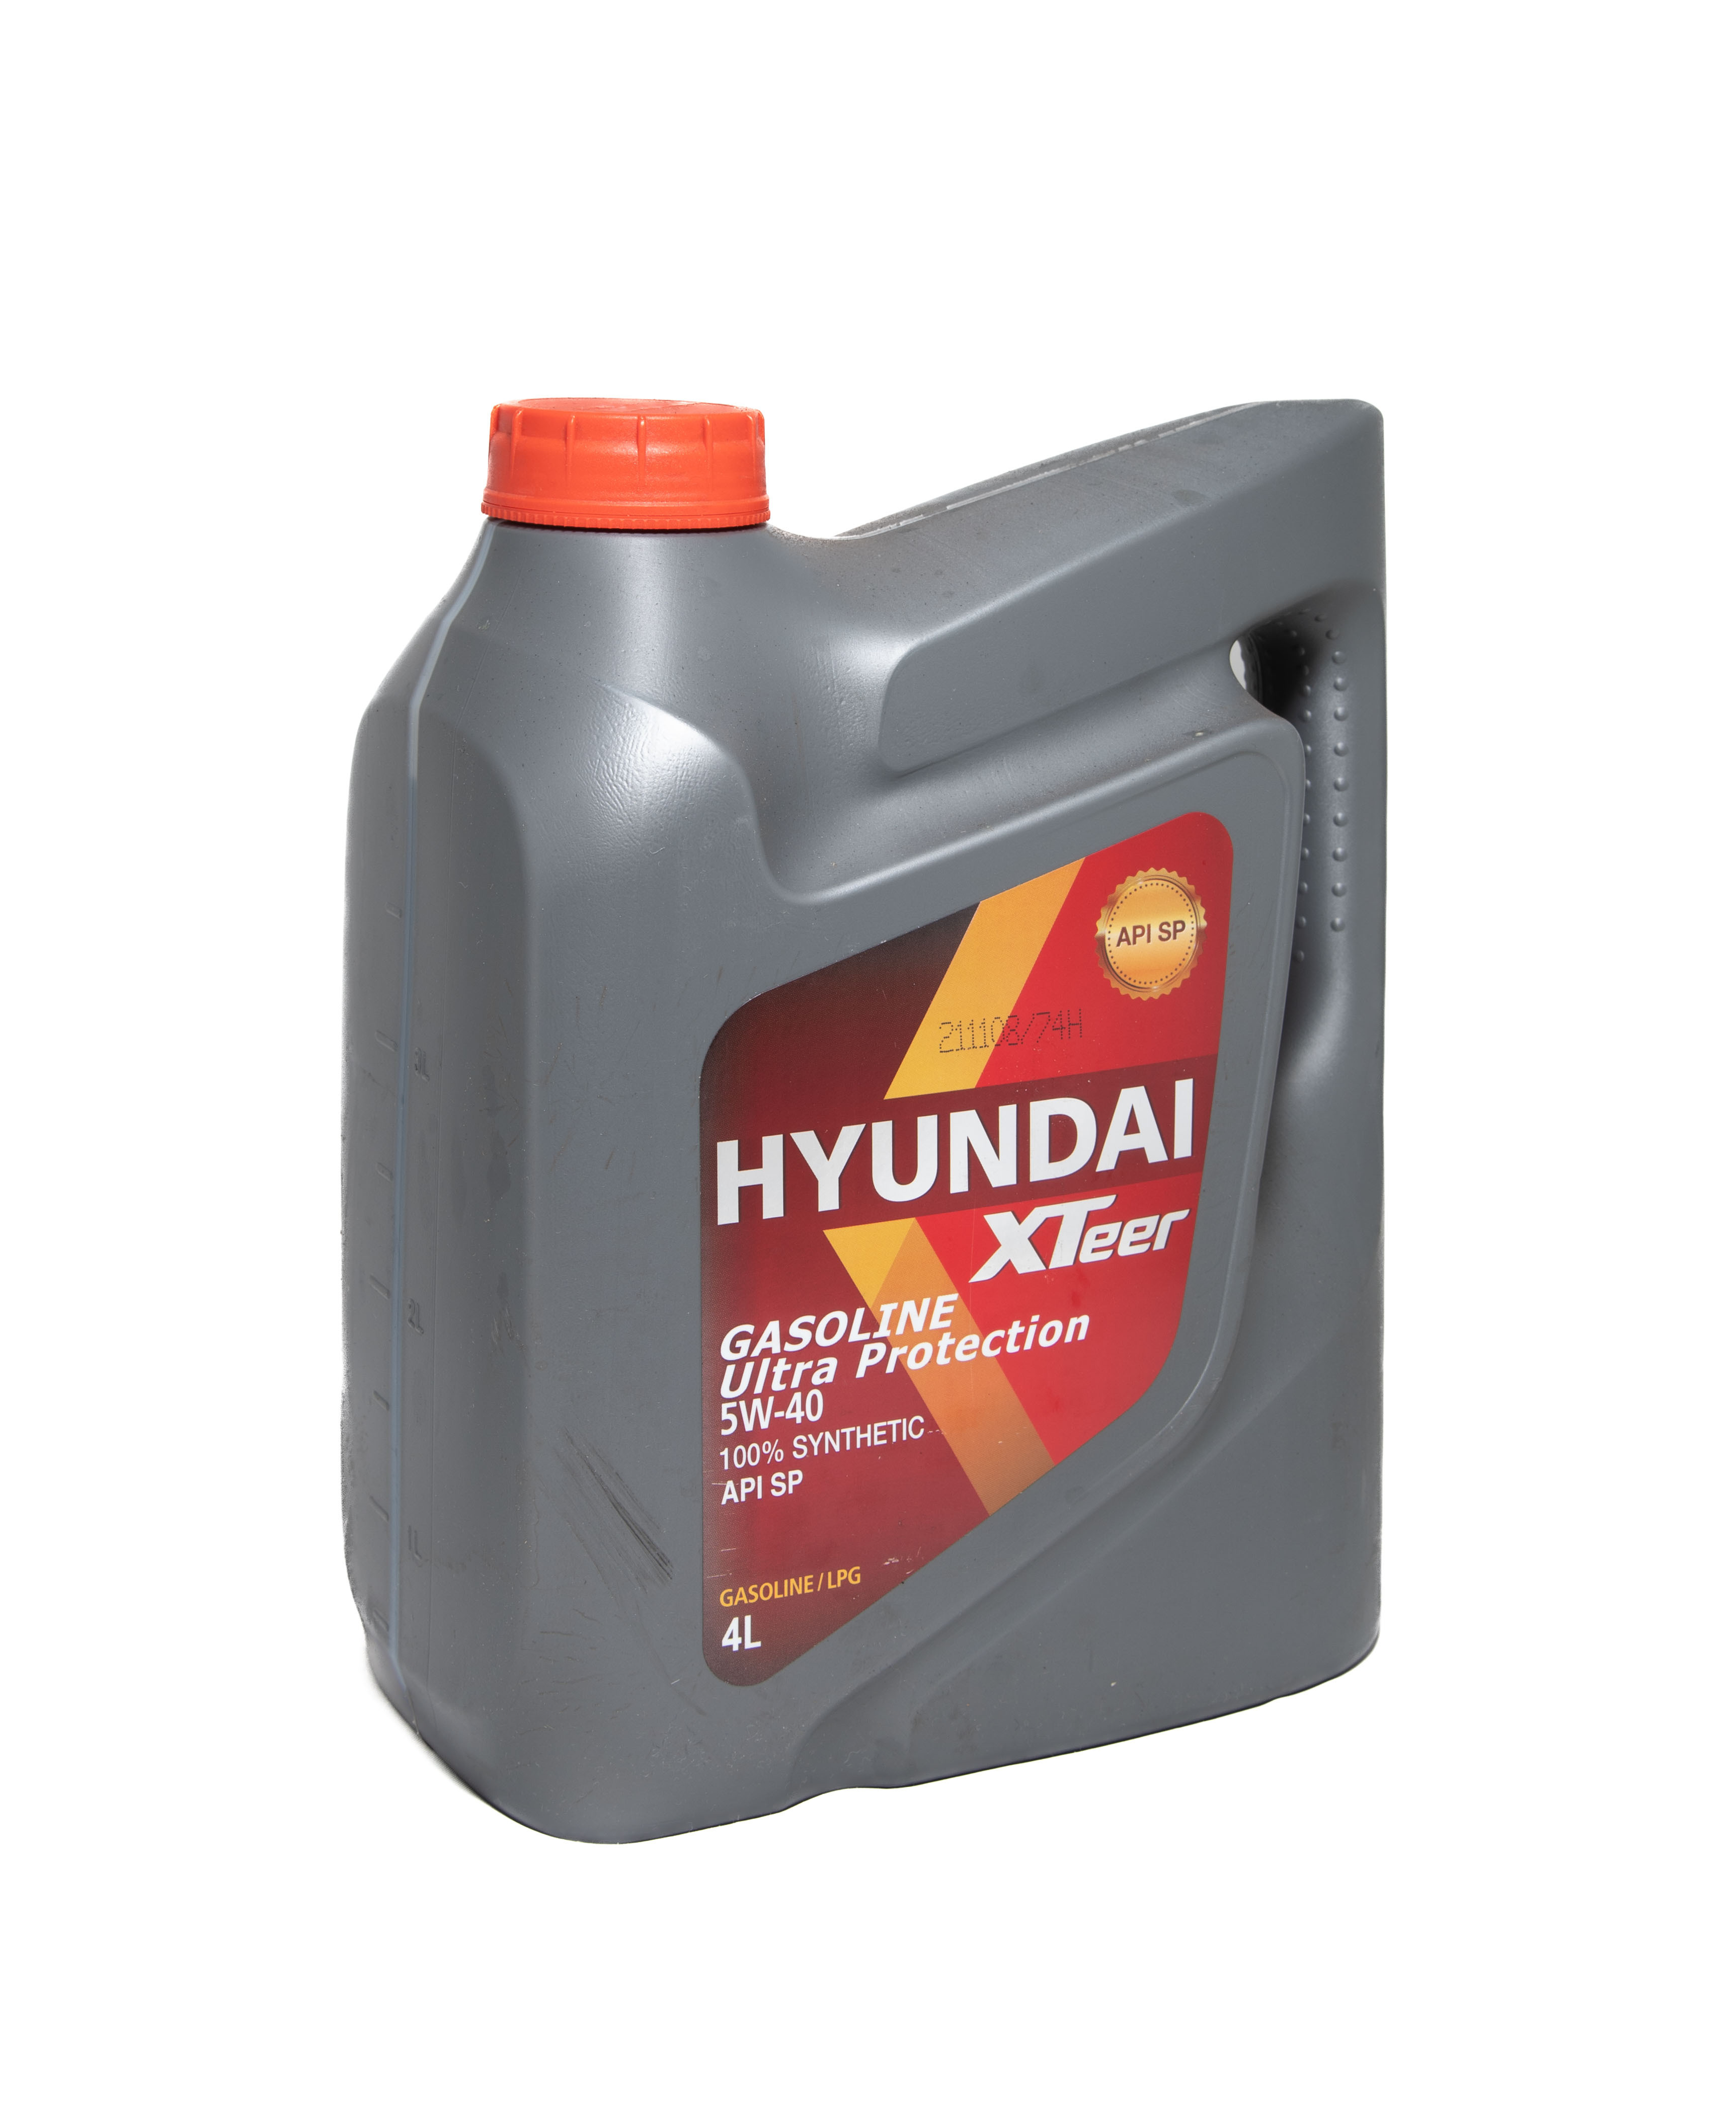 Hyundai xteer 10w 40. Hyundai XTEER 5w40 4л. Hyundai XTEER 5w30. 1011413 Hyundai XTEER. Hyundai XTEER gasoline Ultra Protection 5w40 SP.